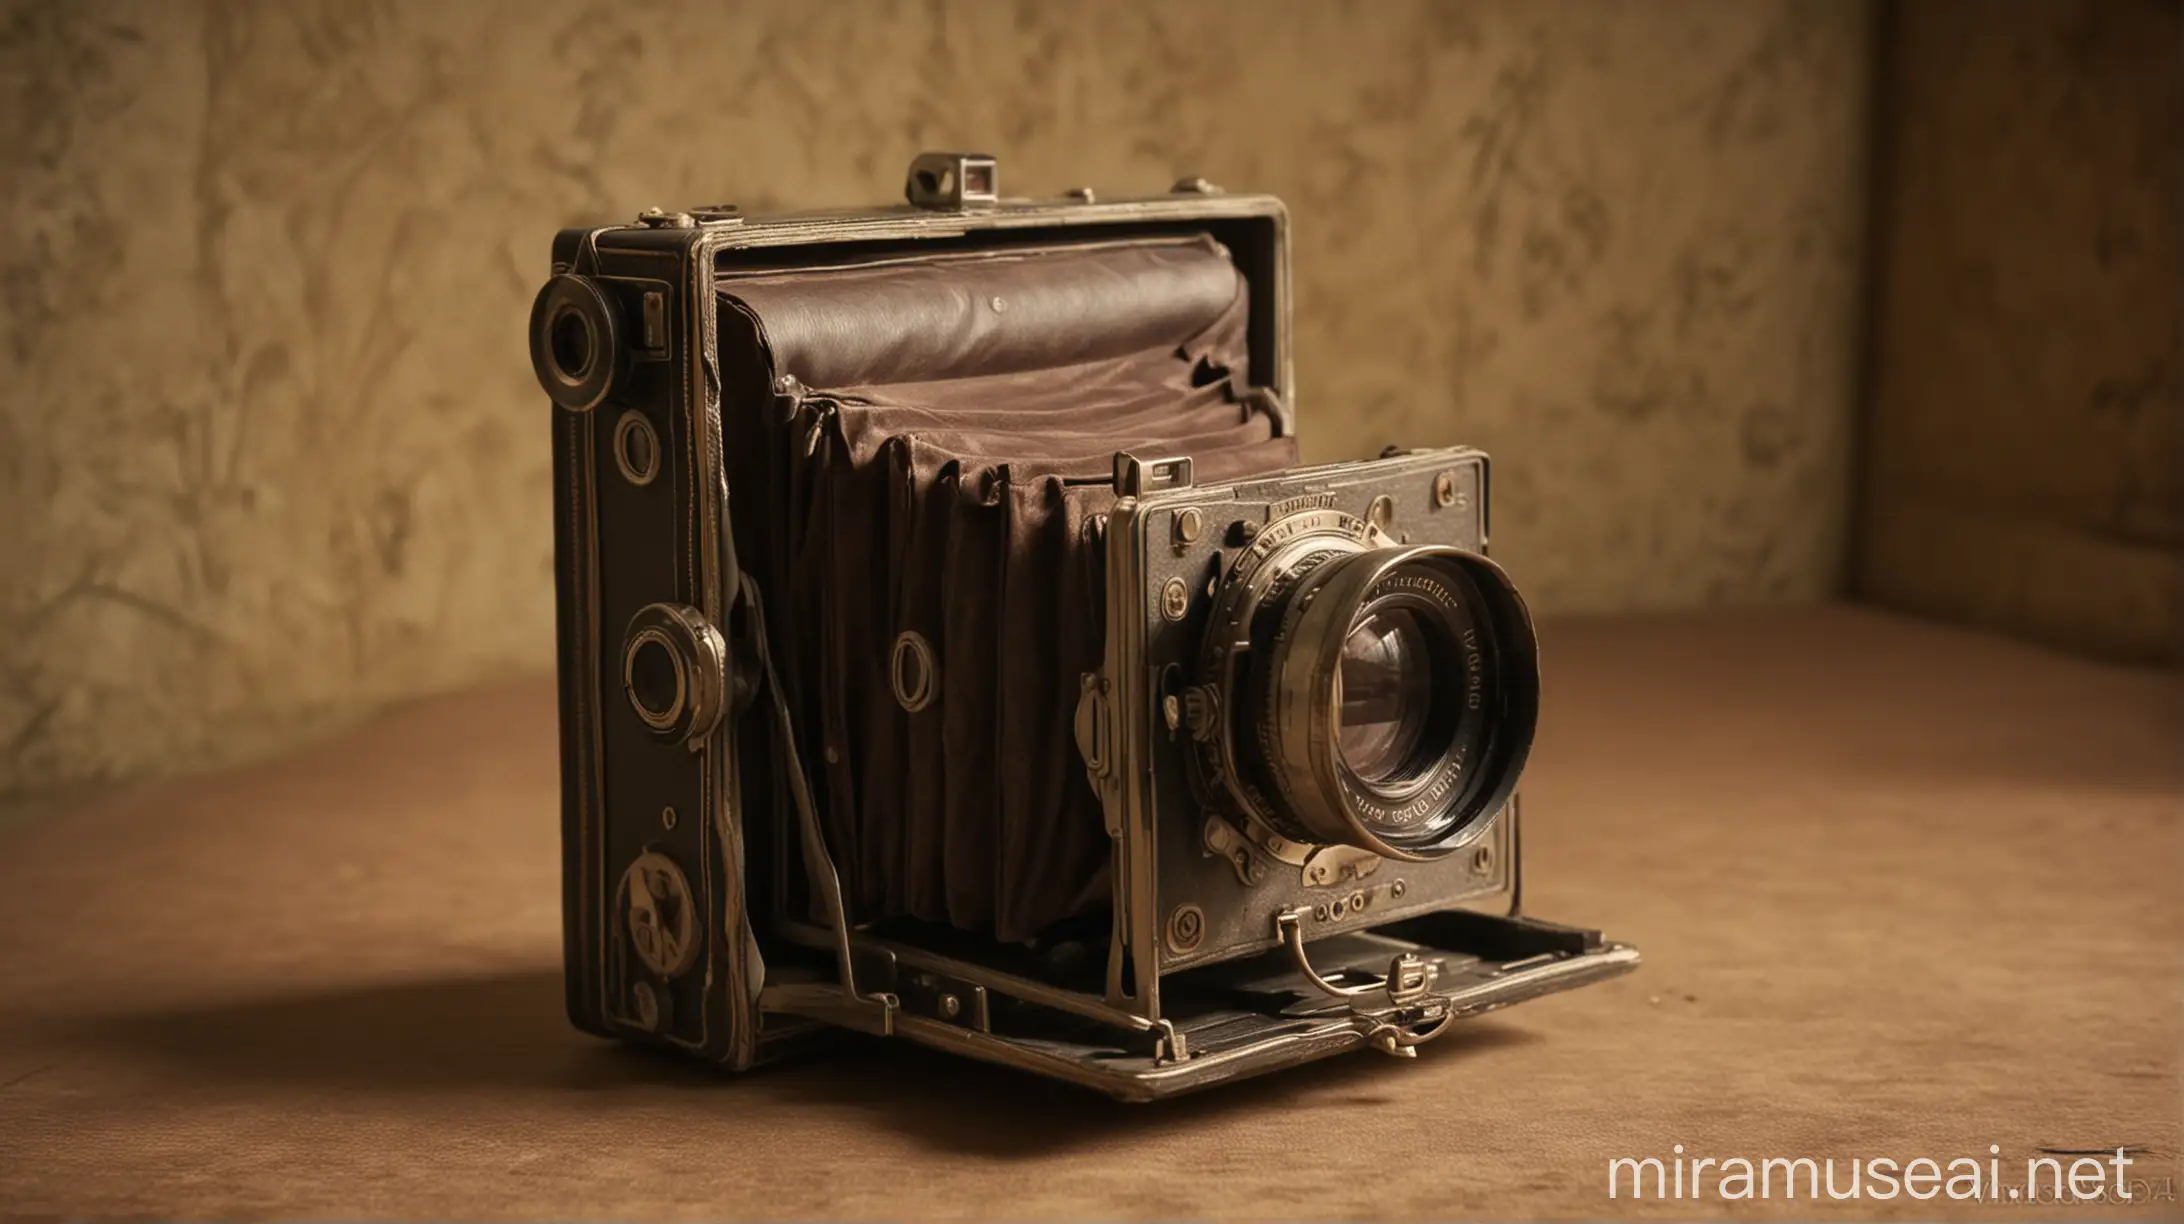 Vintage Scene The Invention of the First Camera Captured in Photography